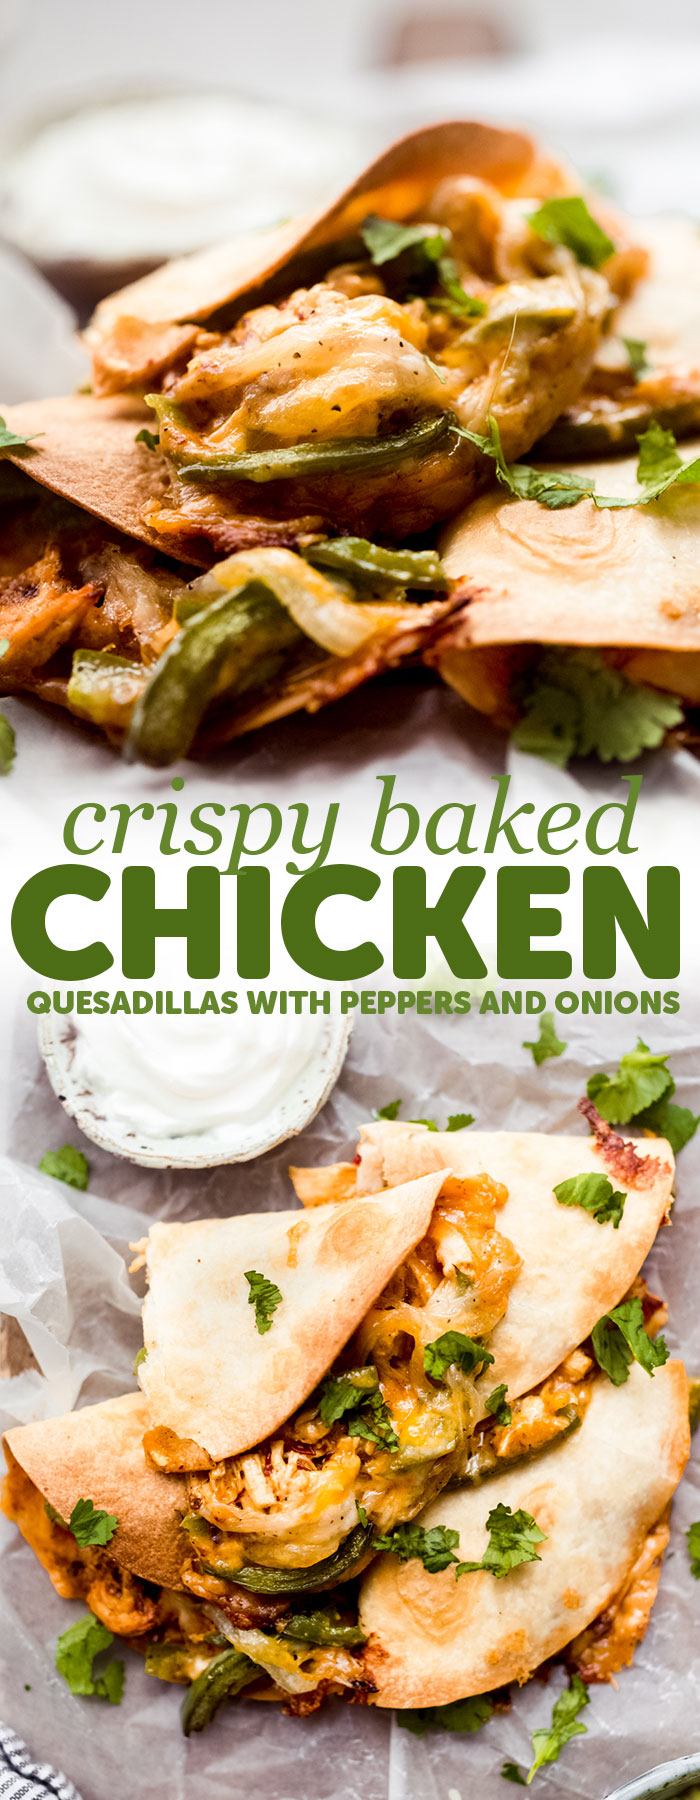 Crispy Baked Chicken Quesadillas - loaded with peppers, onions, creamy chicken and baked until they're crispy and melty! #bakedquesadillas #chickenquesadillas #quesadillas #bakedchickenquesadillas #cincodemayorecipes #superbowlrecipes | Littlespicejar.com